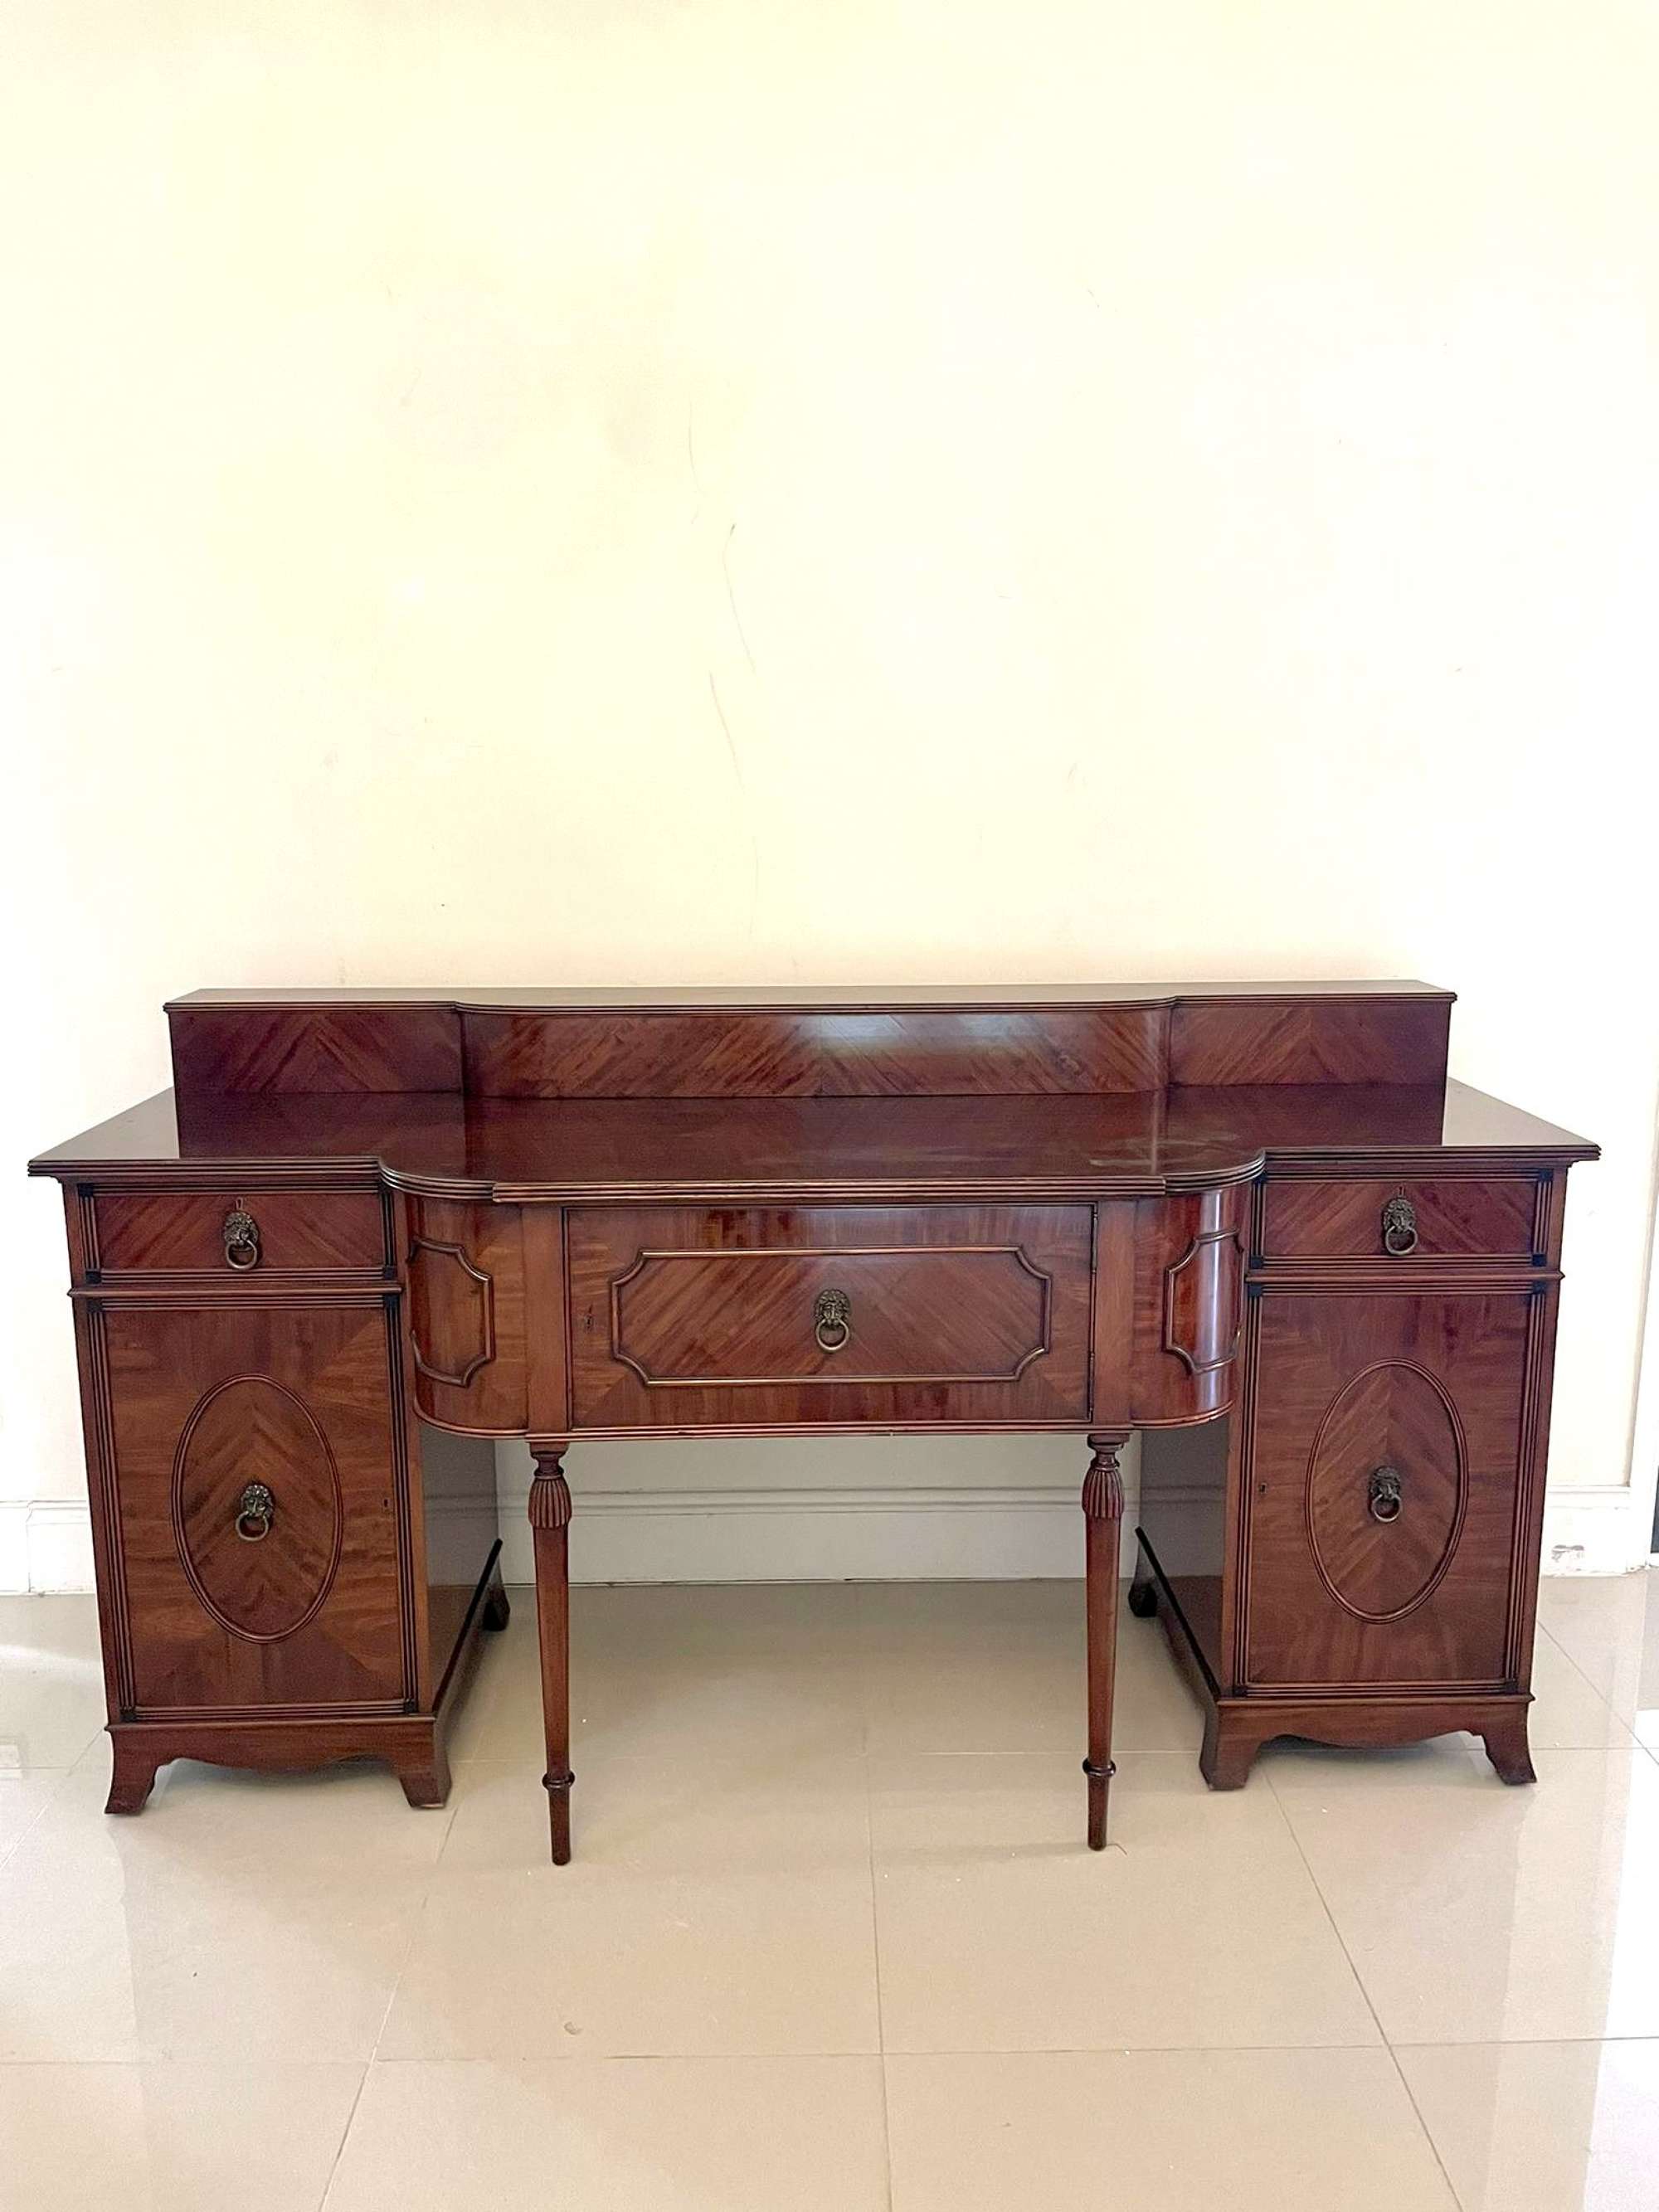 Outstanding Quality Antique Edwardian Mahogany Sideboard